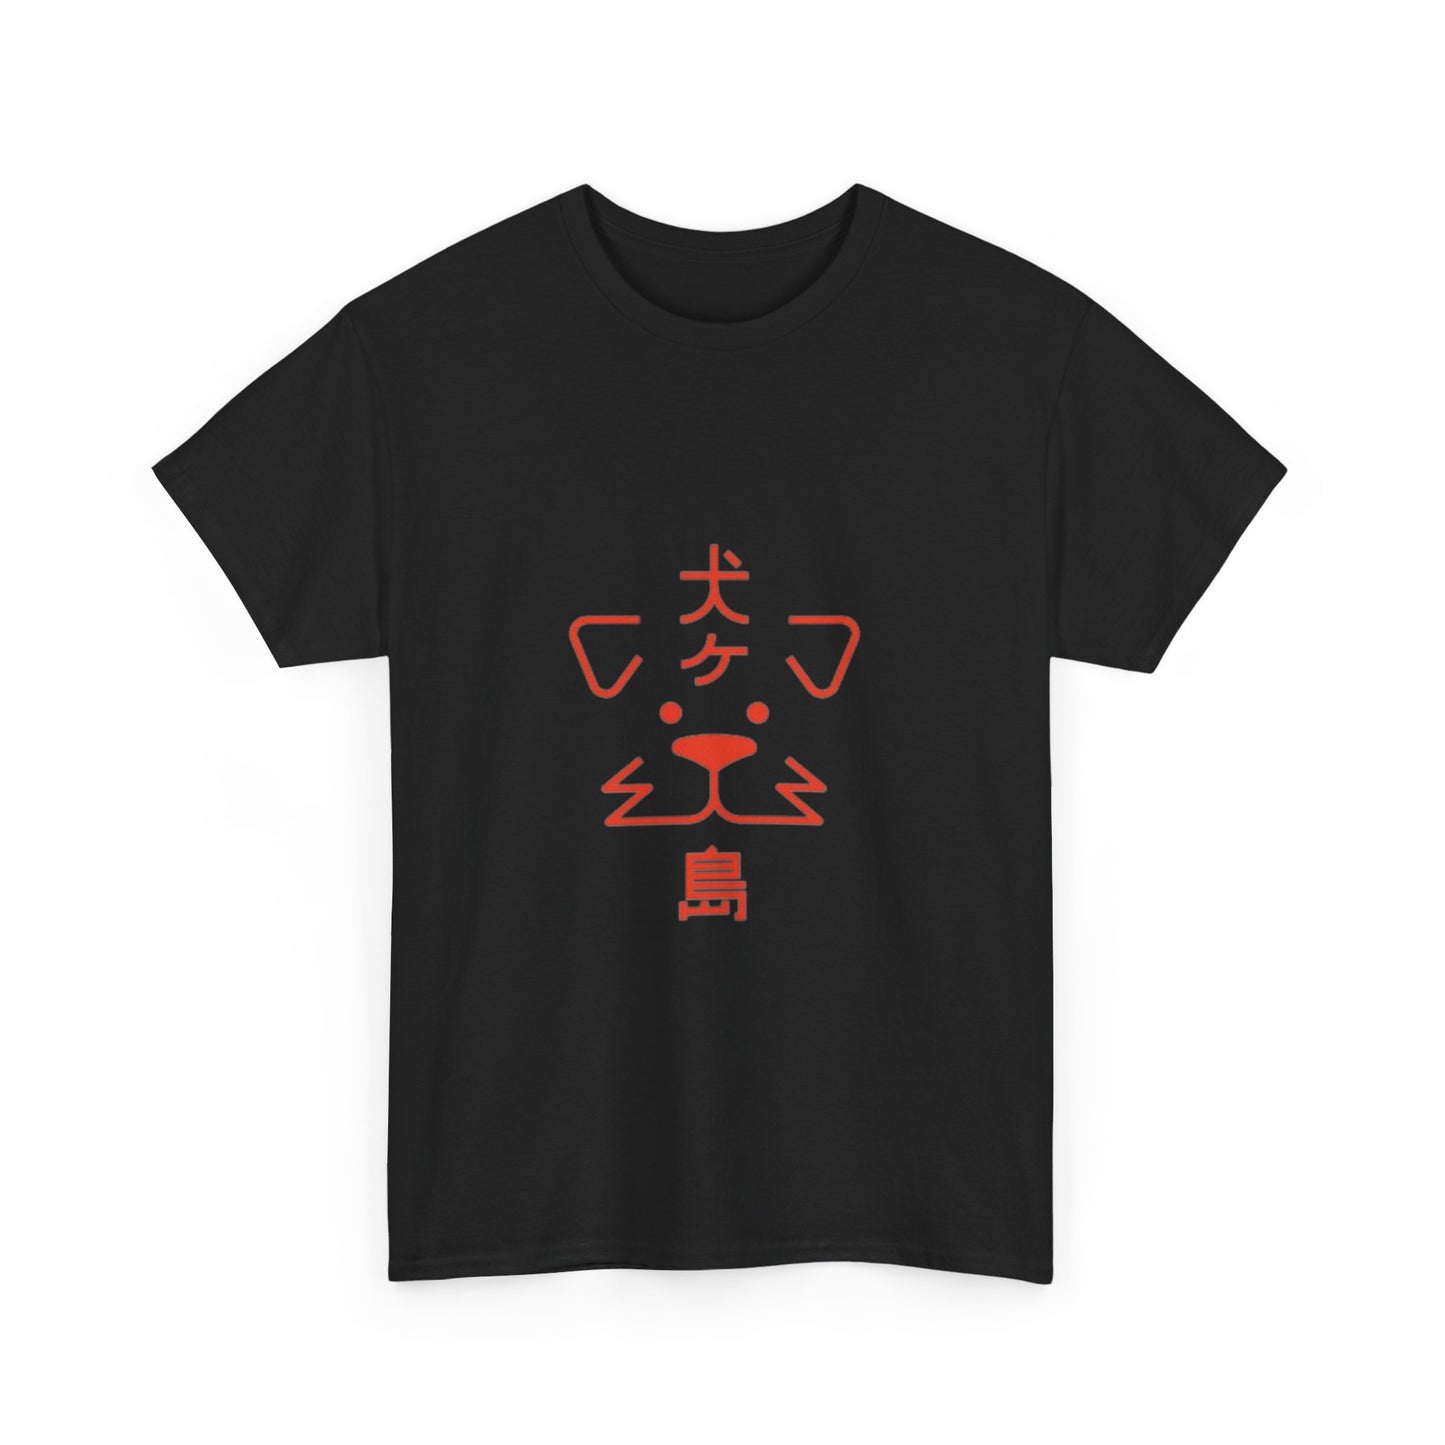 Wes Anderson - Isle of Dogs Printed T-Shirt